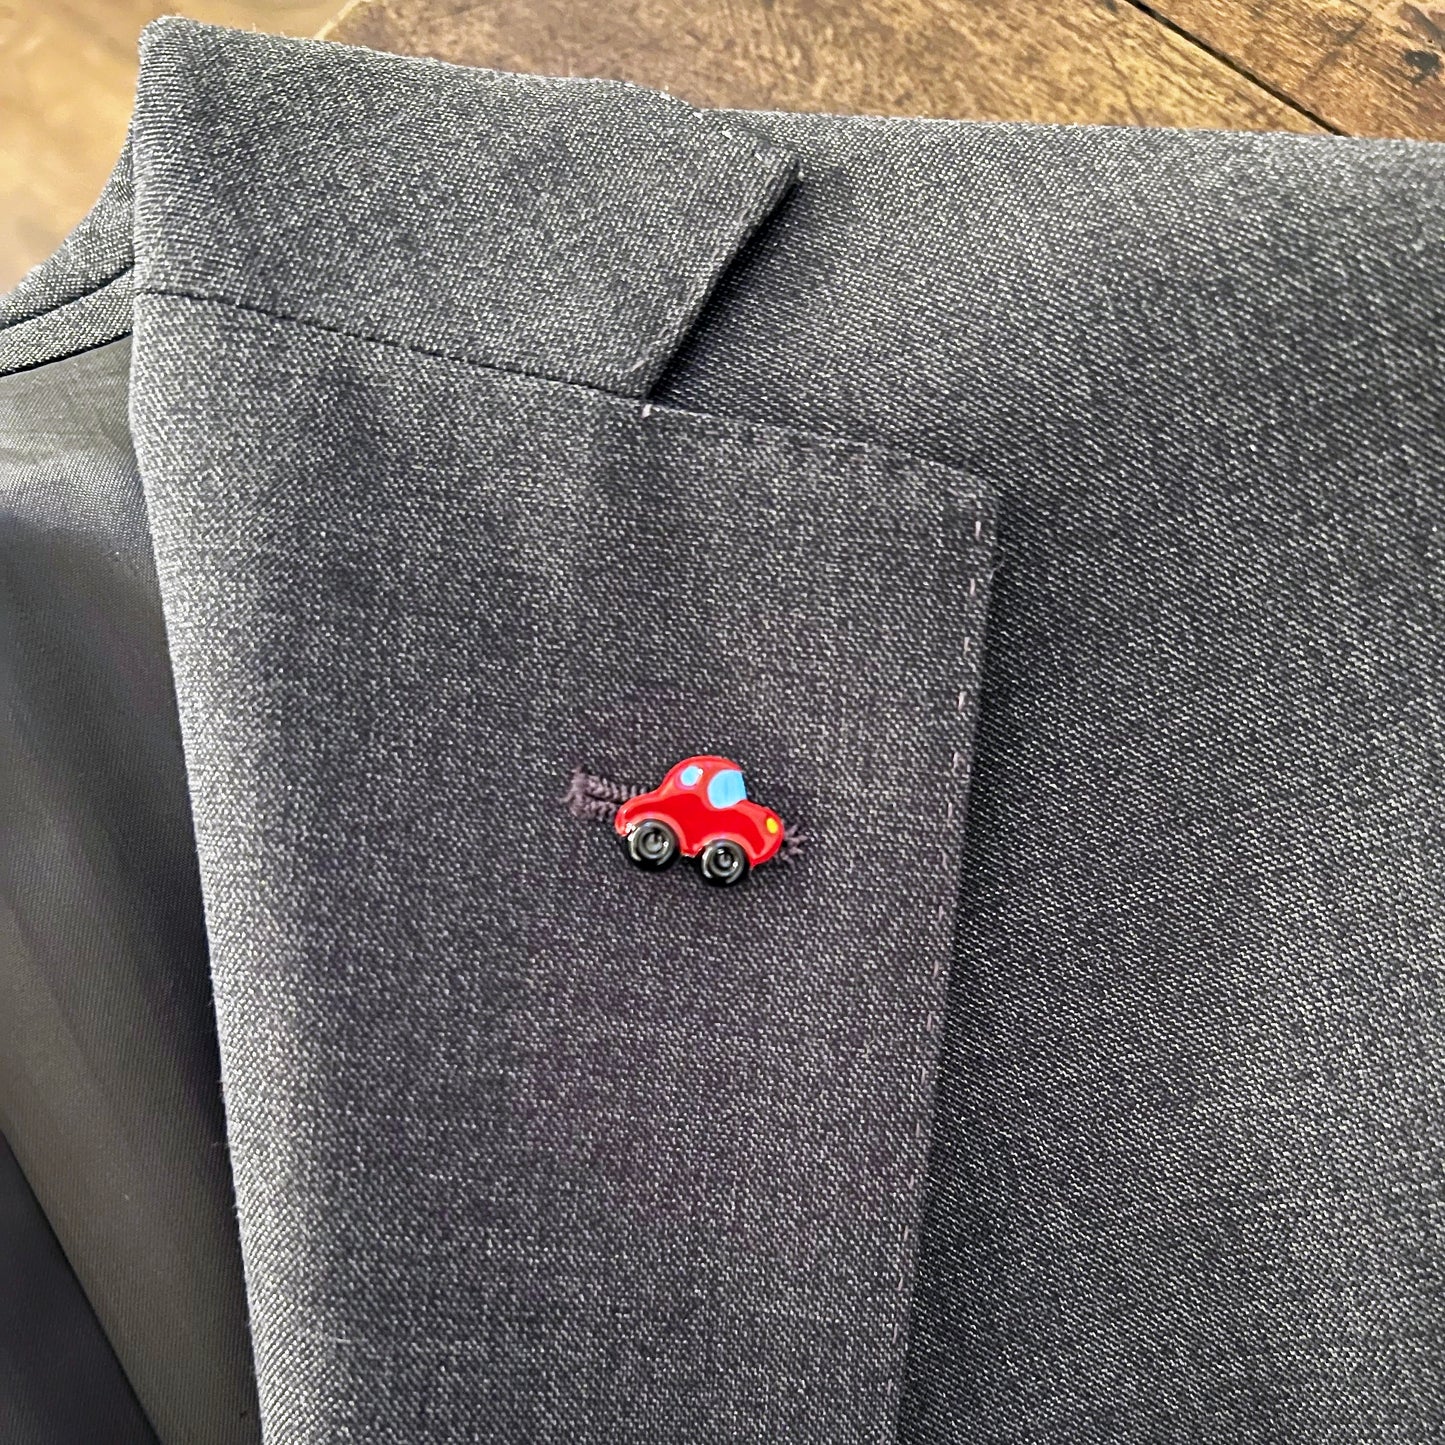 Car pin in sterling silver and enamel